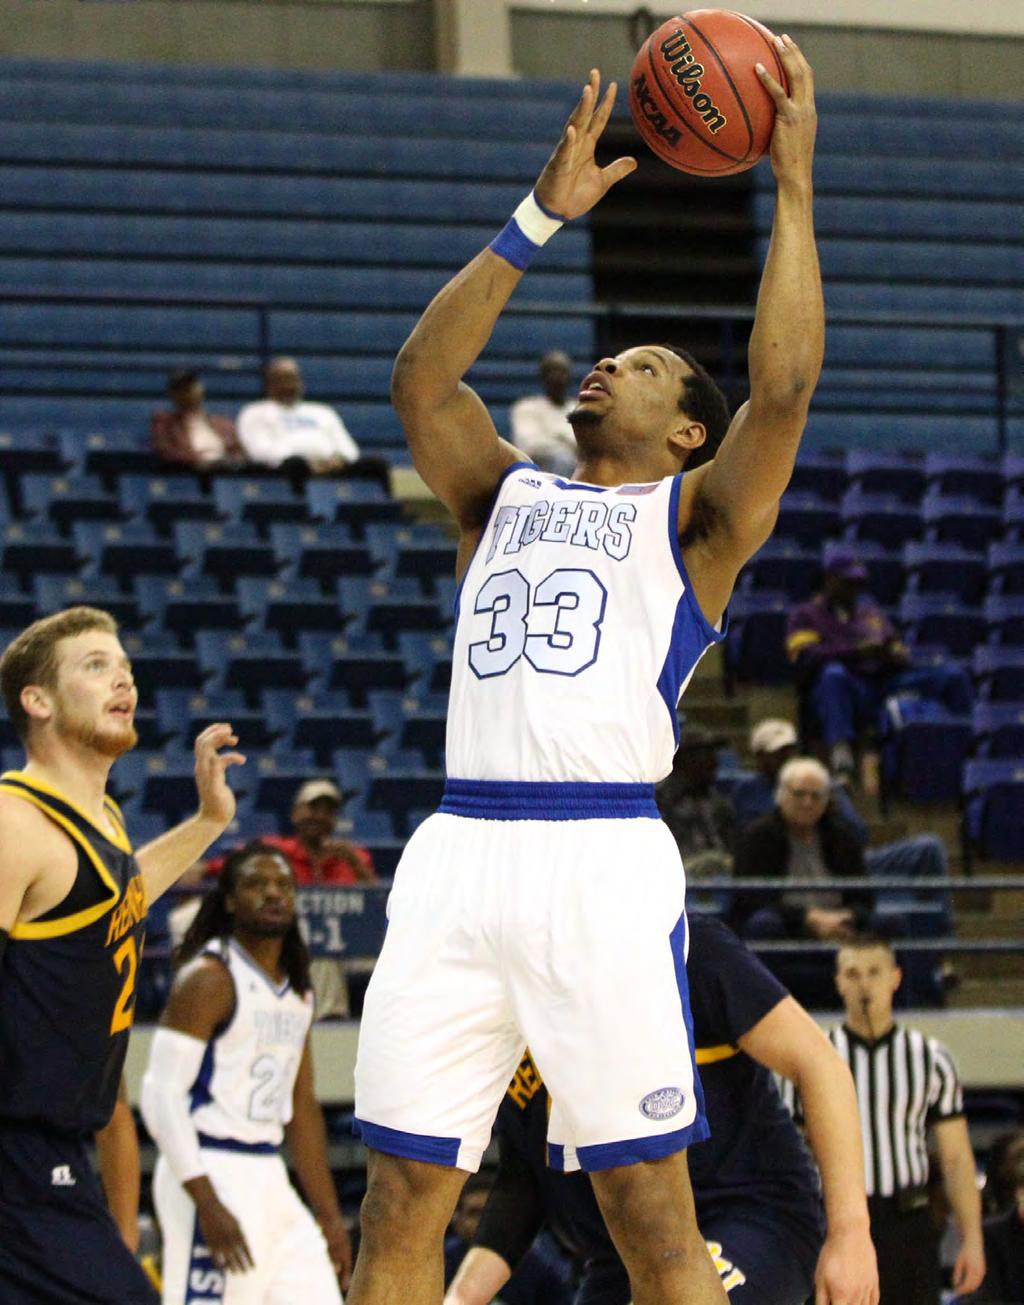 STUDENT-ATHLETES - AME-BY-AME Tennessee State Men's Basketball Tennessee State Individual ame-by-ame (as of Apr, ) All games # MARTIN, Wayne Opponent at Loyola Maryland at Ohio FISK MIDDLE TENNESSEE